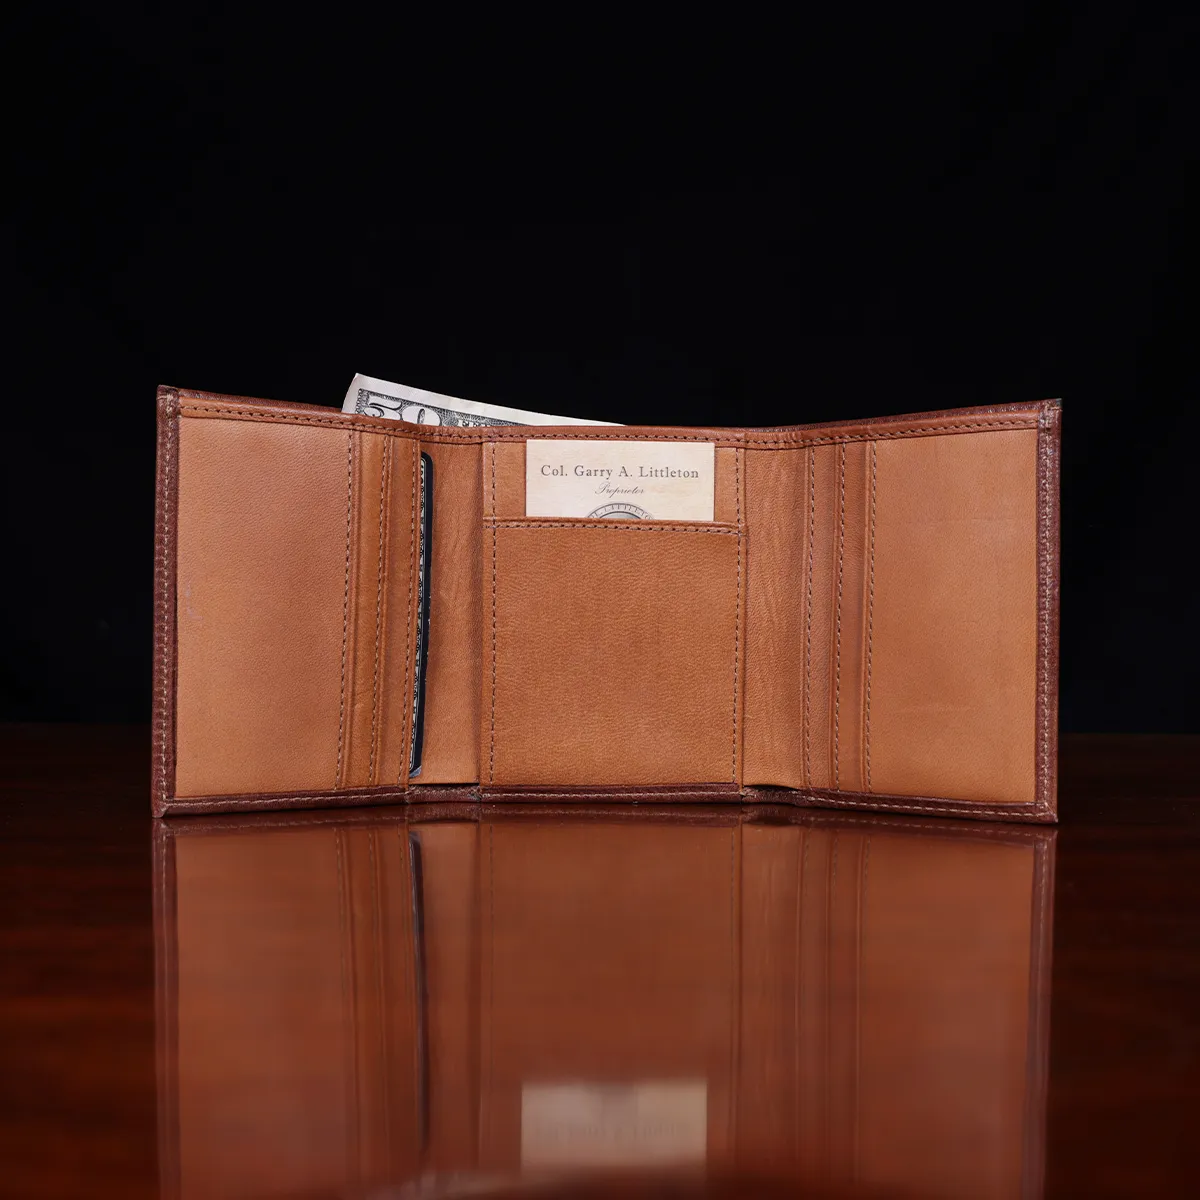 Custom Order ~ Minimal Stamped or Initial Men's Trifold Leather